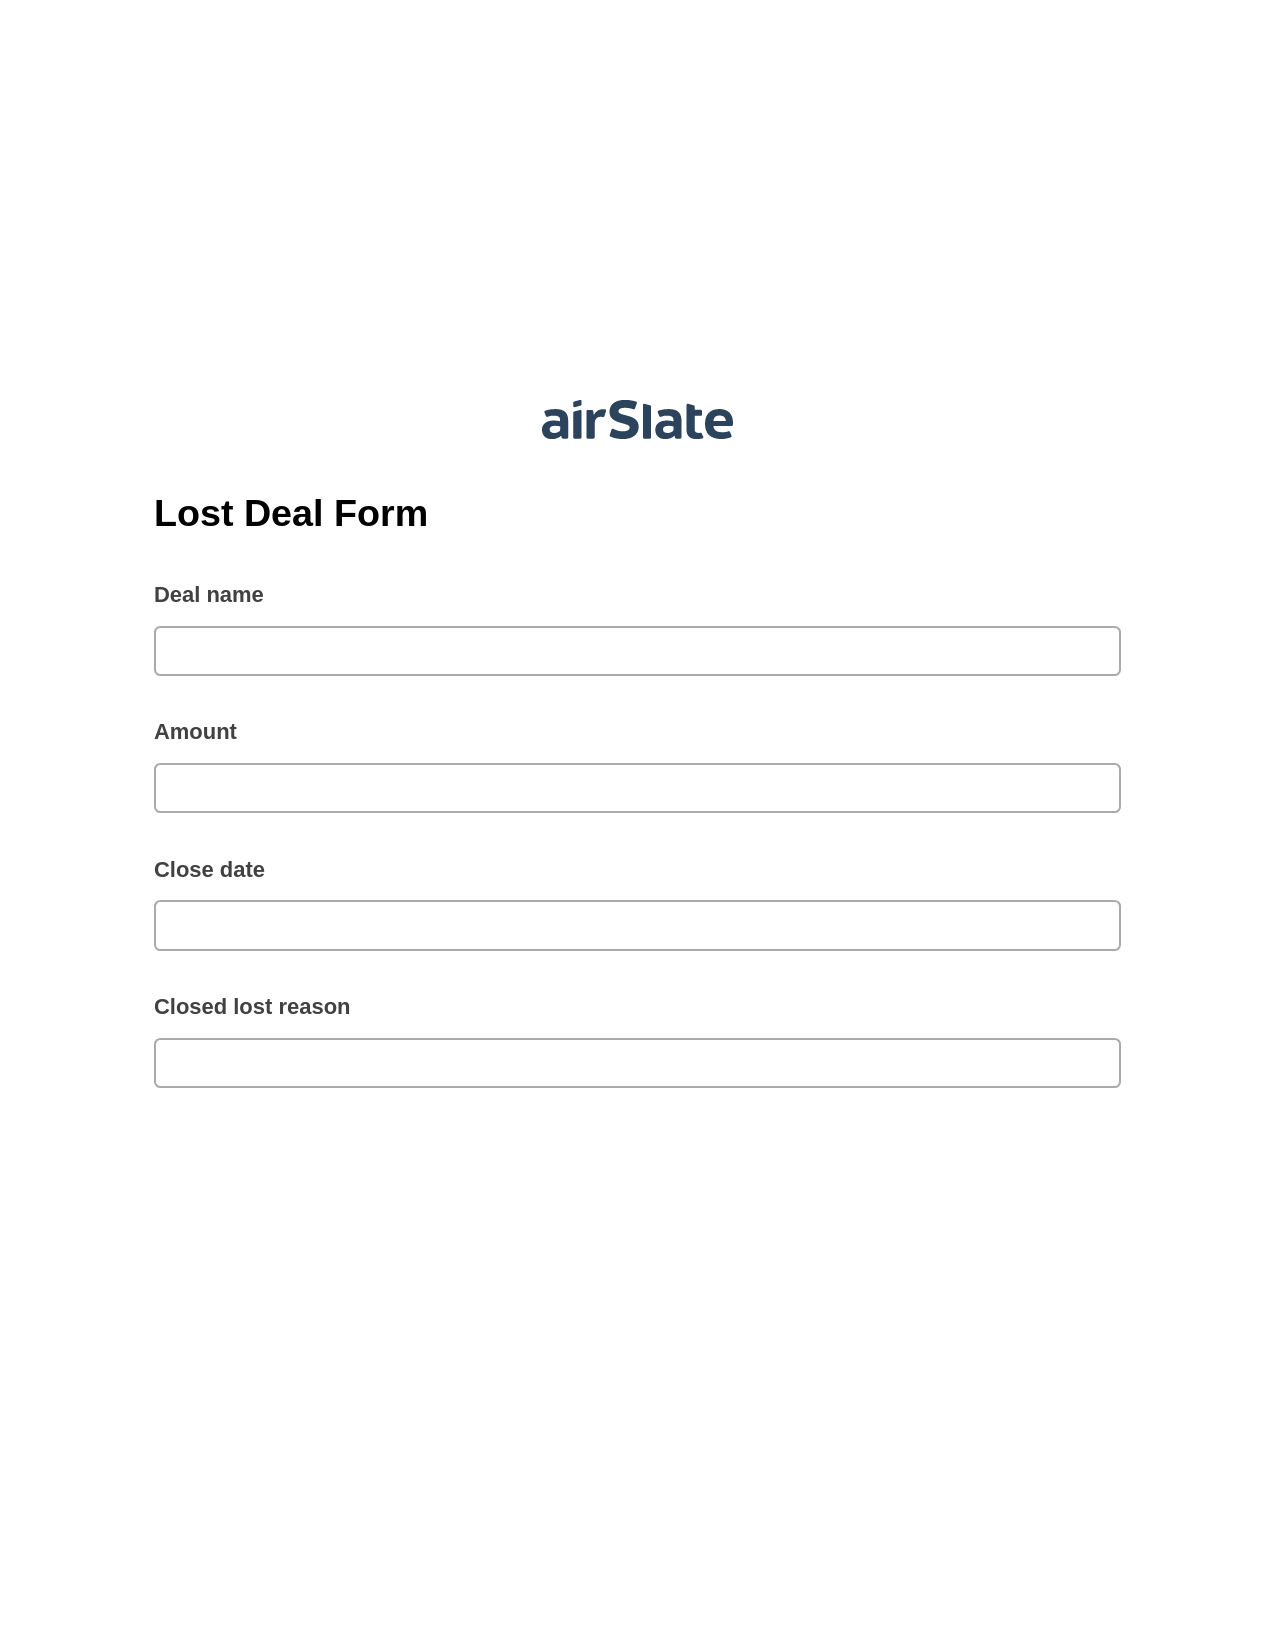 Lost Deal Form Pre-fill from Salesforce Records Bot, Webhook Bot, Export to Google Sheet Bot